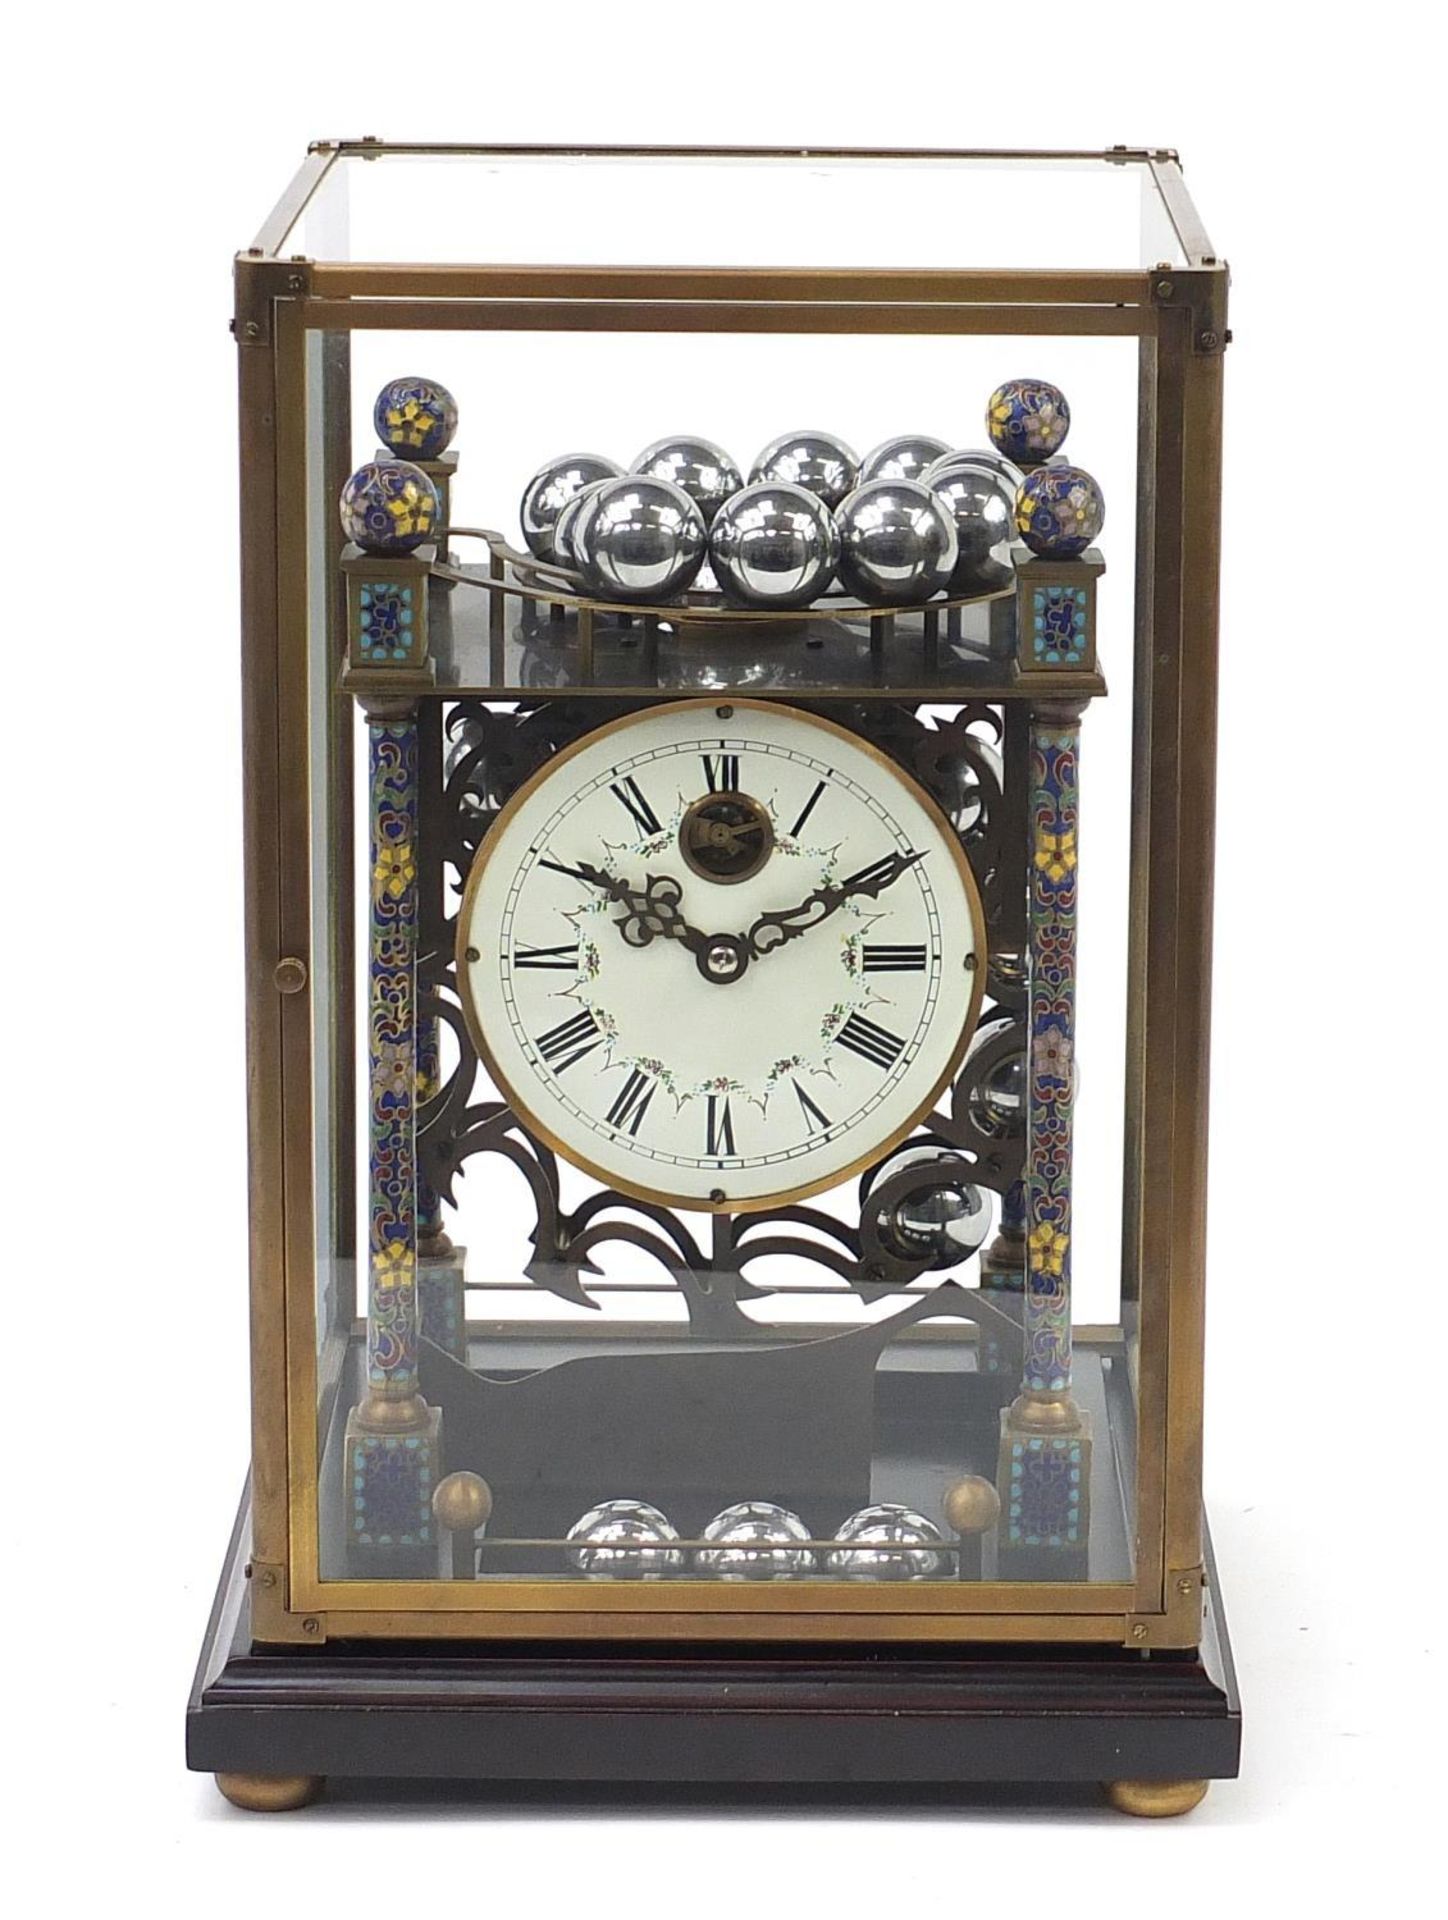 Champlevé enamel rolling ball clock with enamel dial having Roman numerals and glass display case, - Image 2 of 8